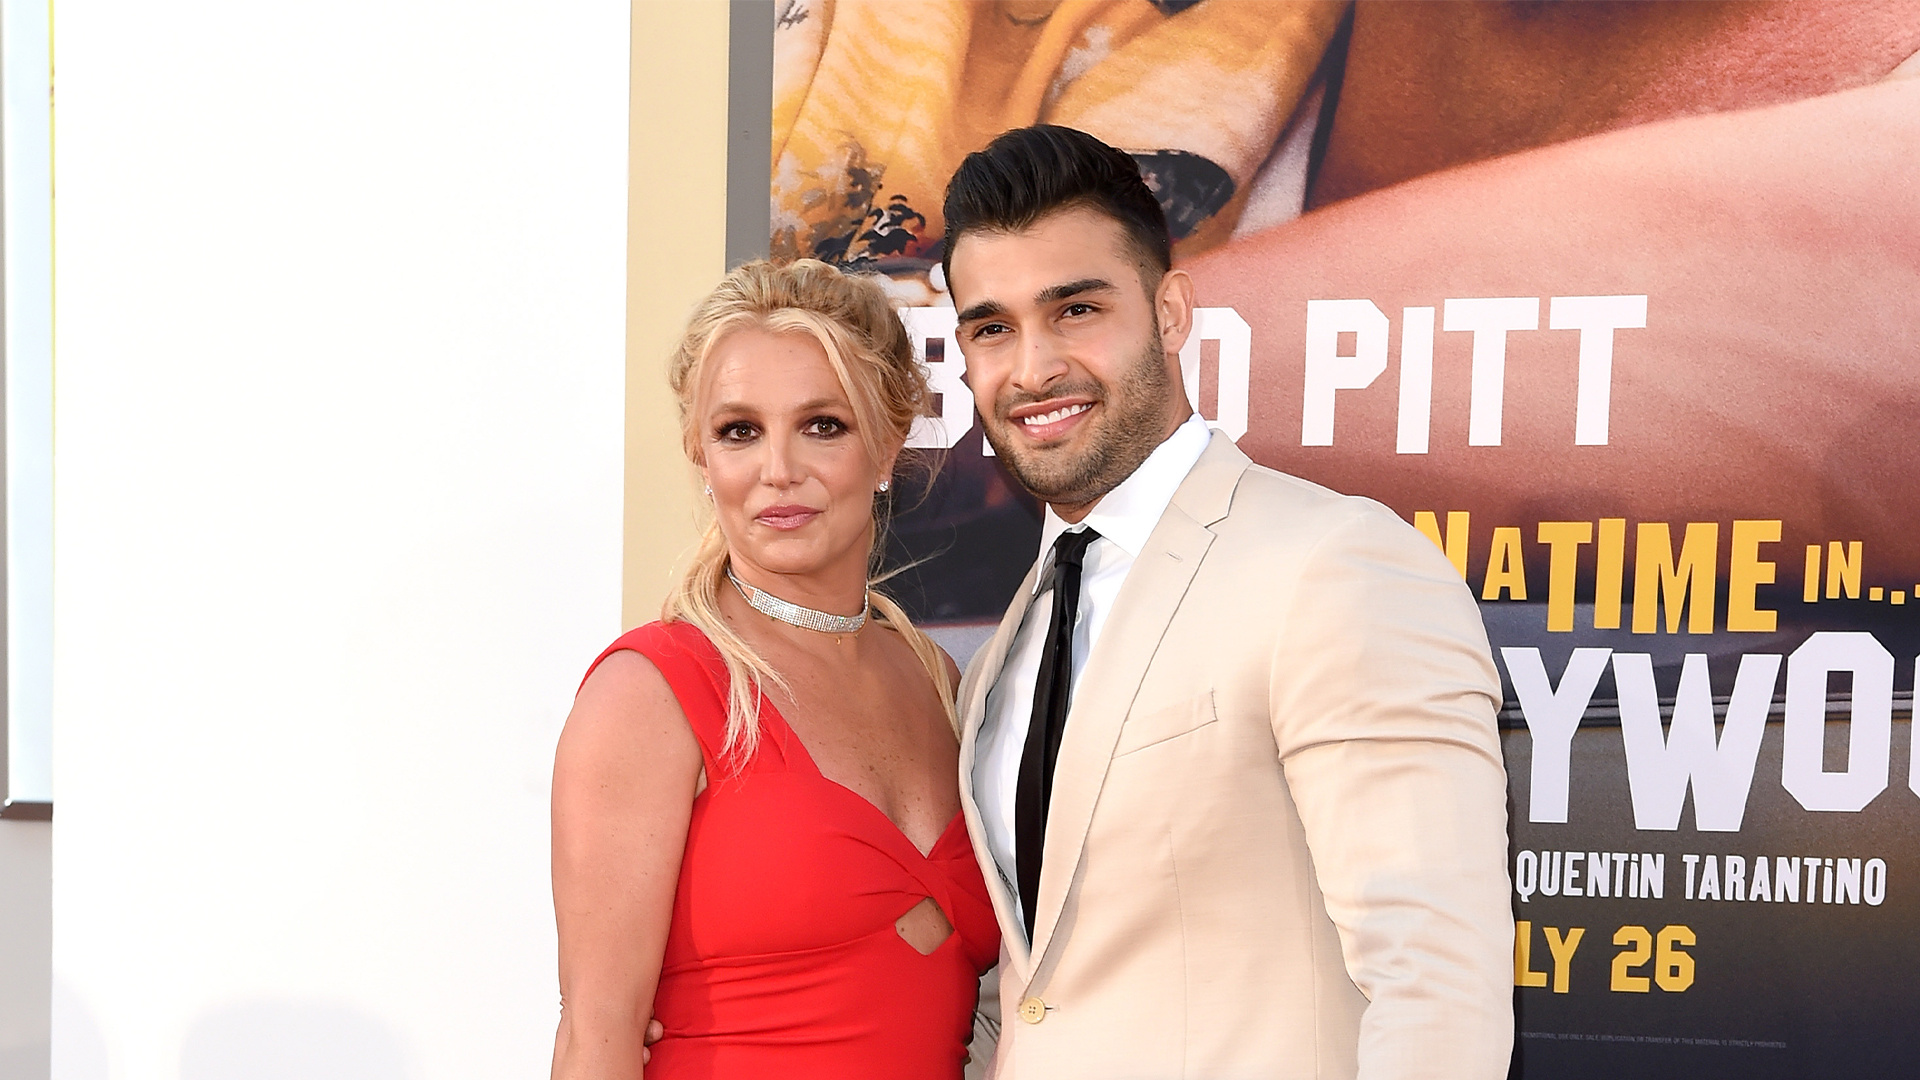 Sam Asghar and Britney Spears: Spears and her new husband, Have been dating since 2016. 1920x1080 Full HD Wallpaper.